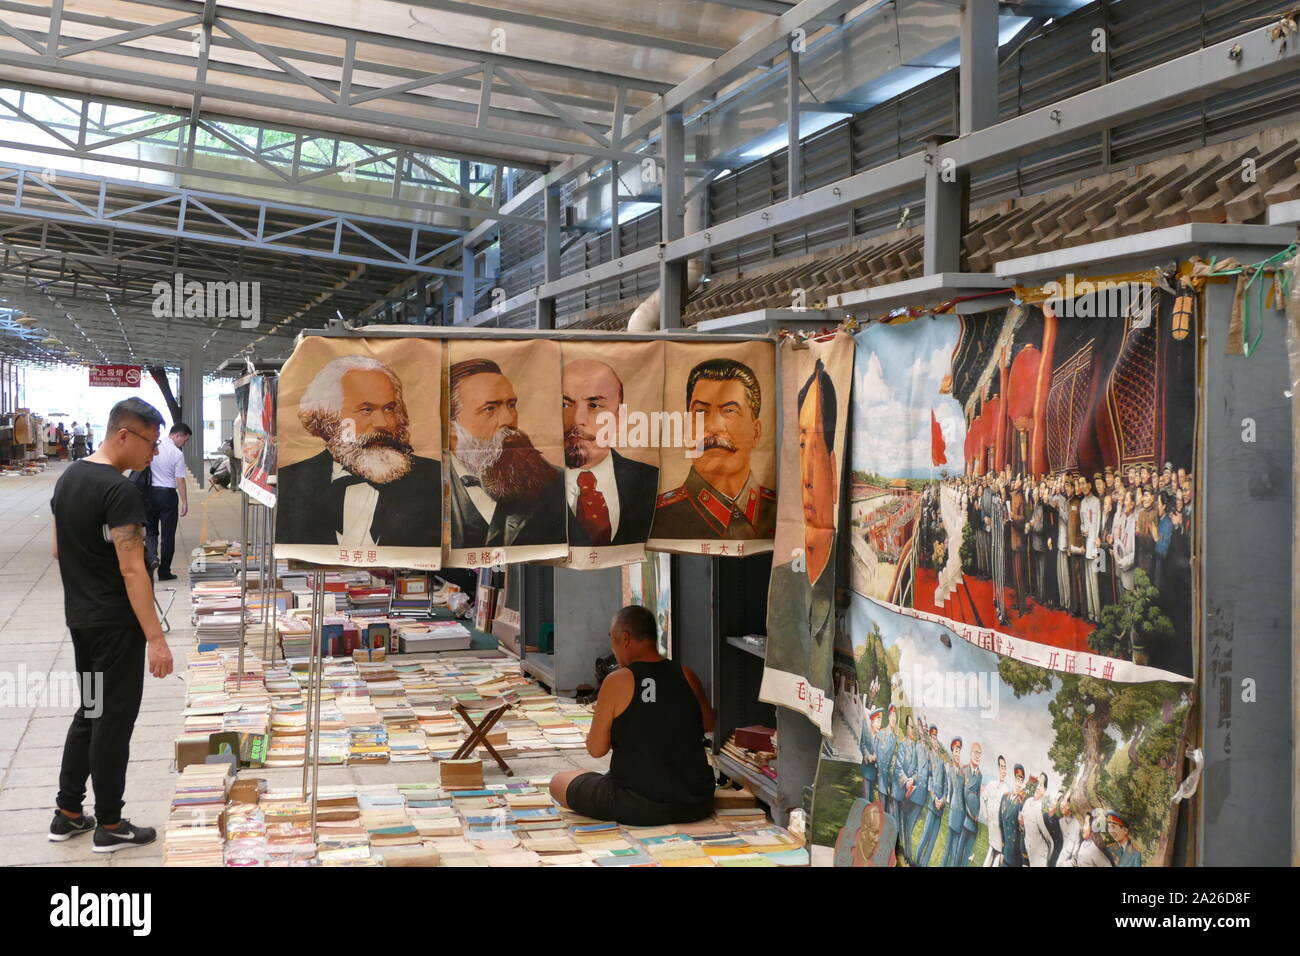 Portraits of Karl Marx, Friederich Engels, Vladimir Lenin and Joseph Stalin in a Chinese market. These popular symbols of communism sit alongside a portrait of Chairman Mao Stock Photo